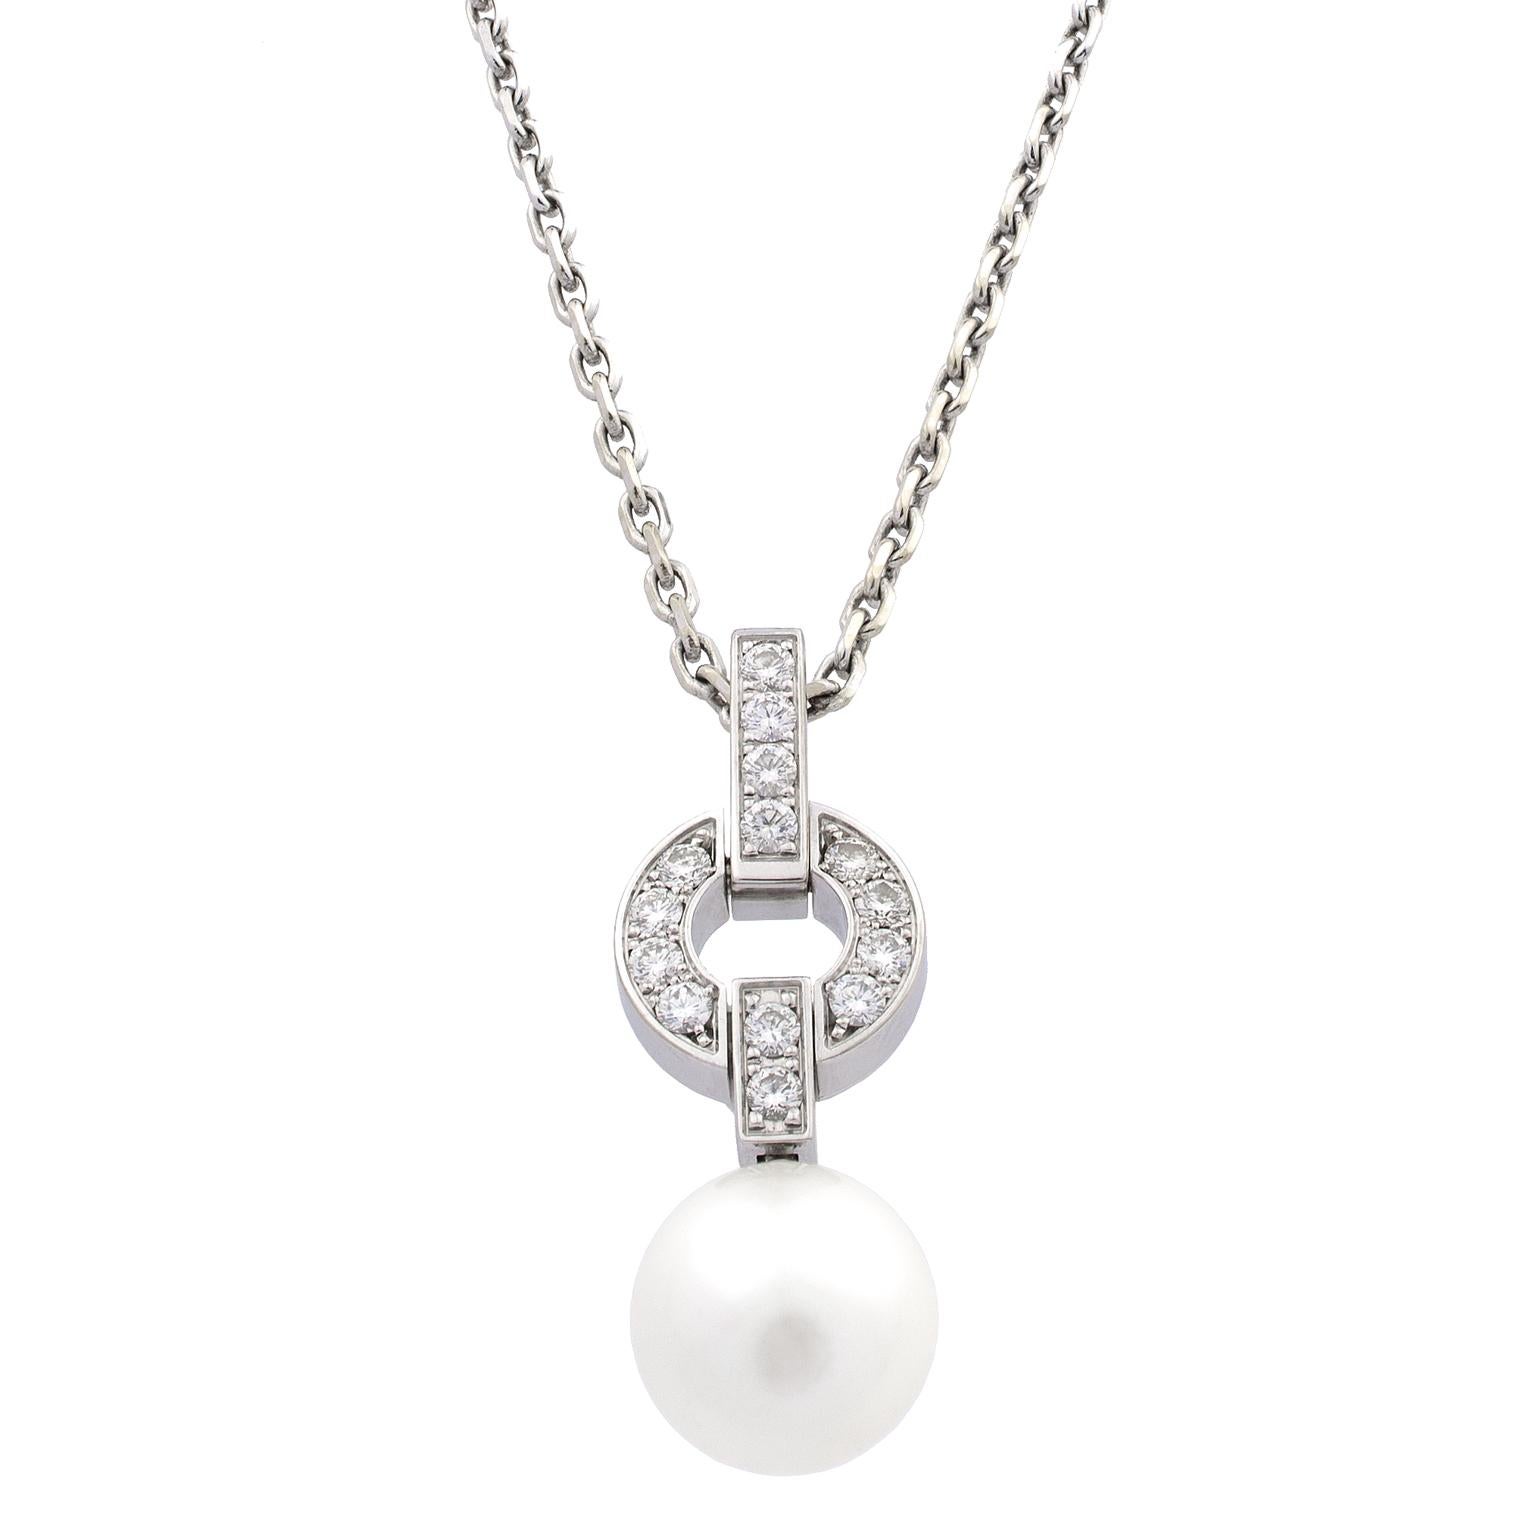 Necklace from the Himalia collection from Cartier in white gold, set with 14 round brilliant cut diamonds totalling 0.25 carats, decorated with a pearl.